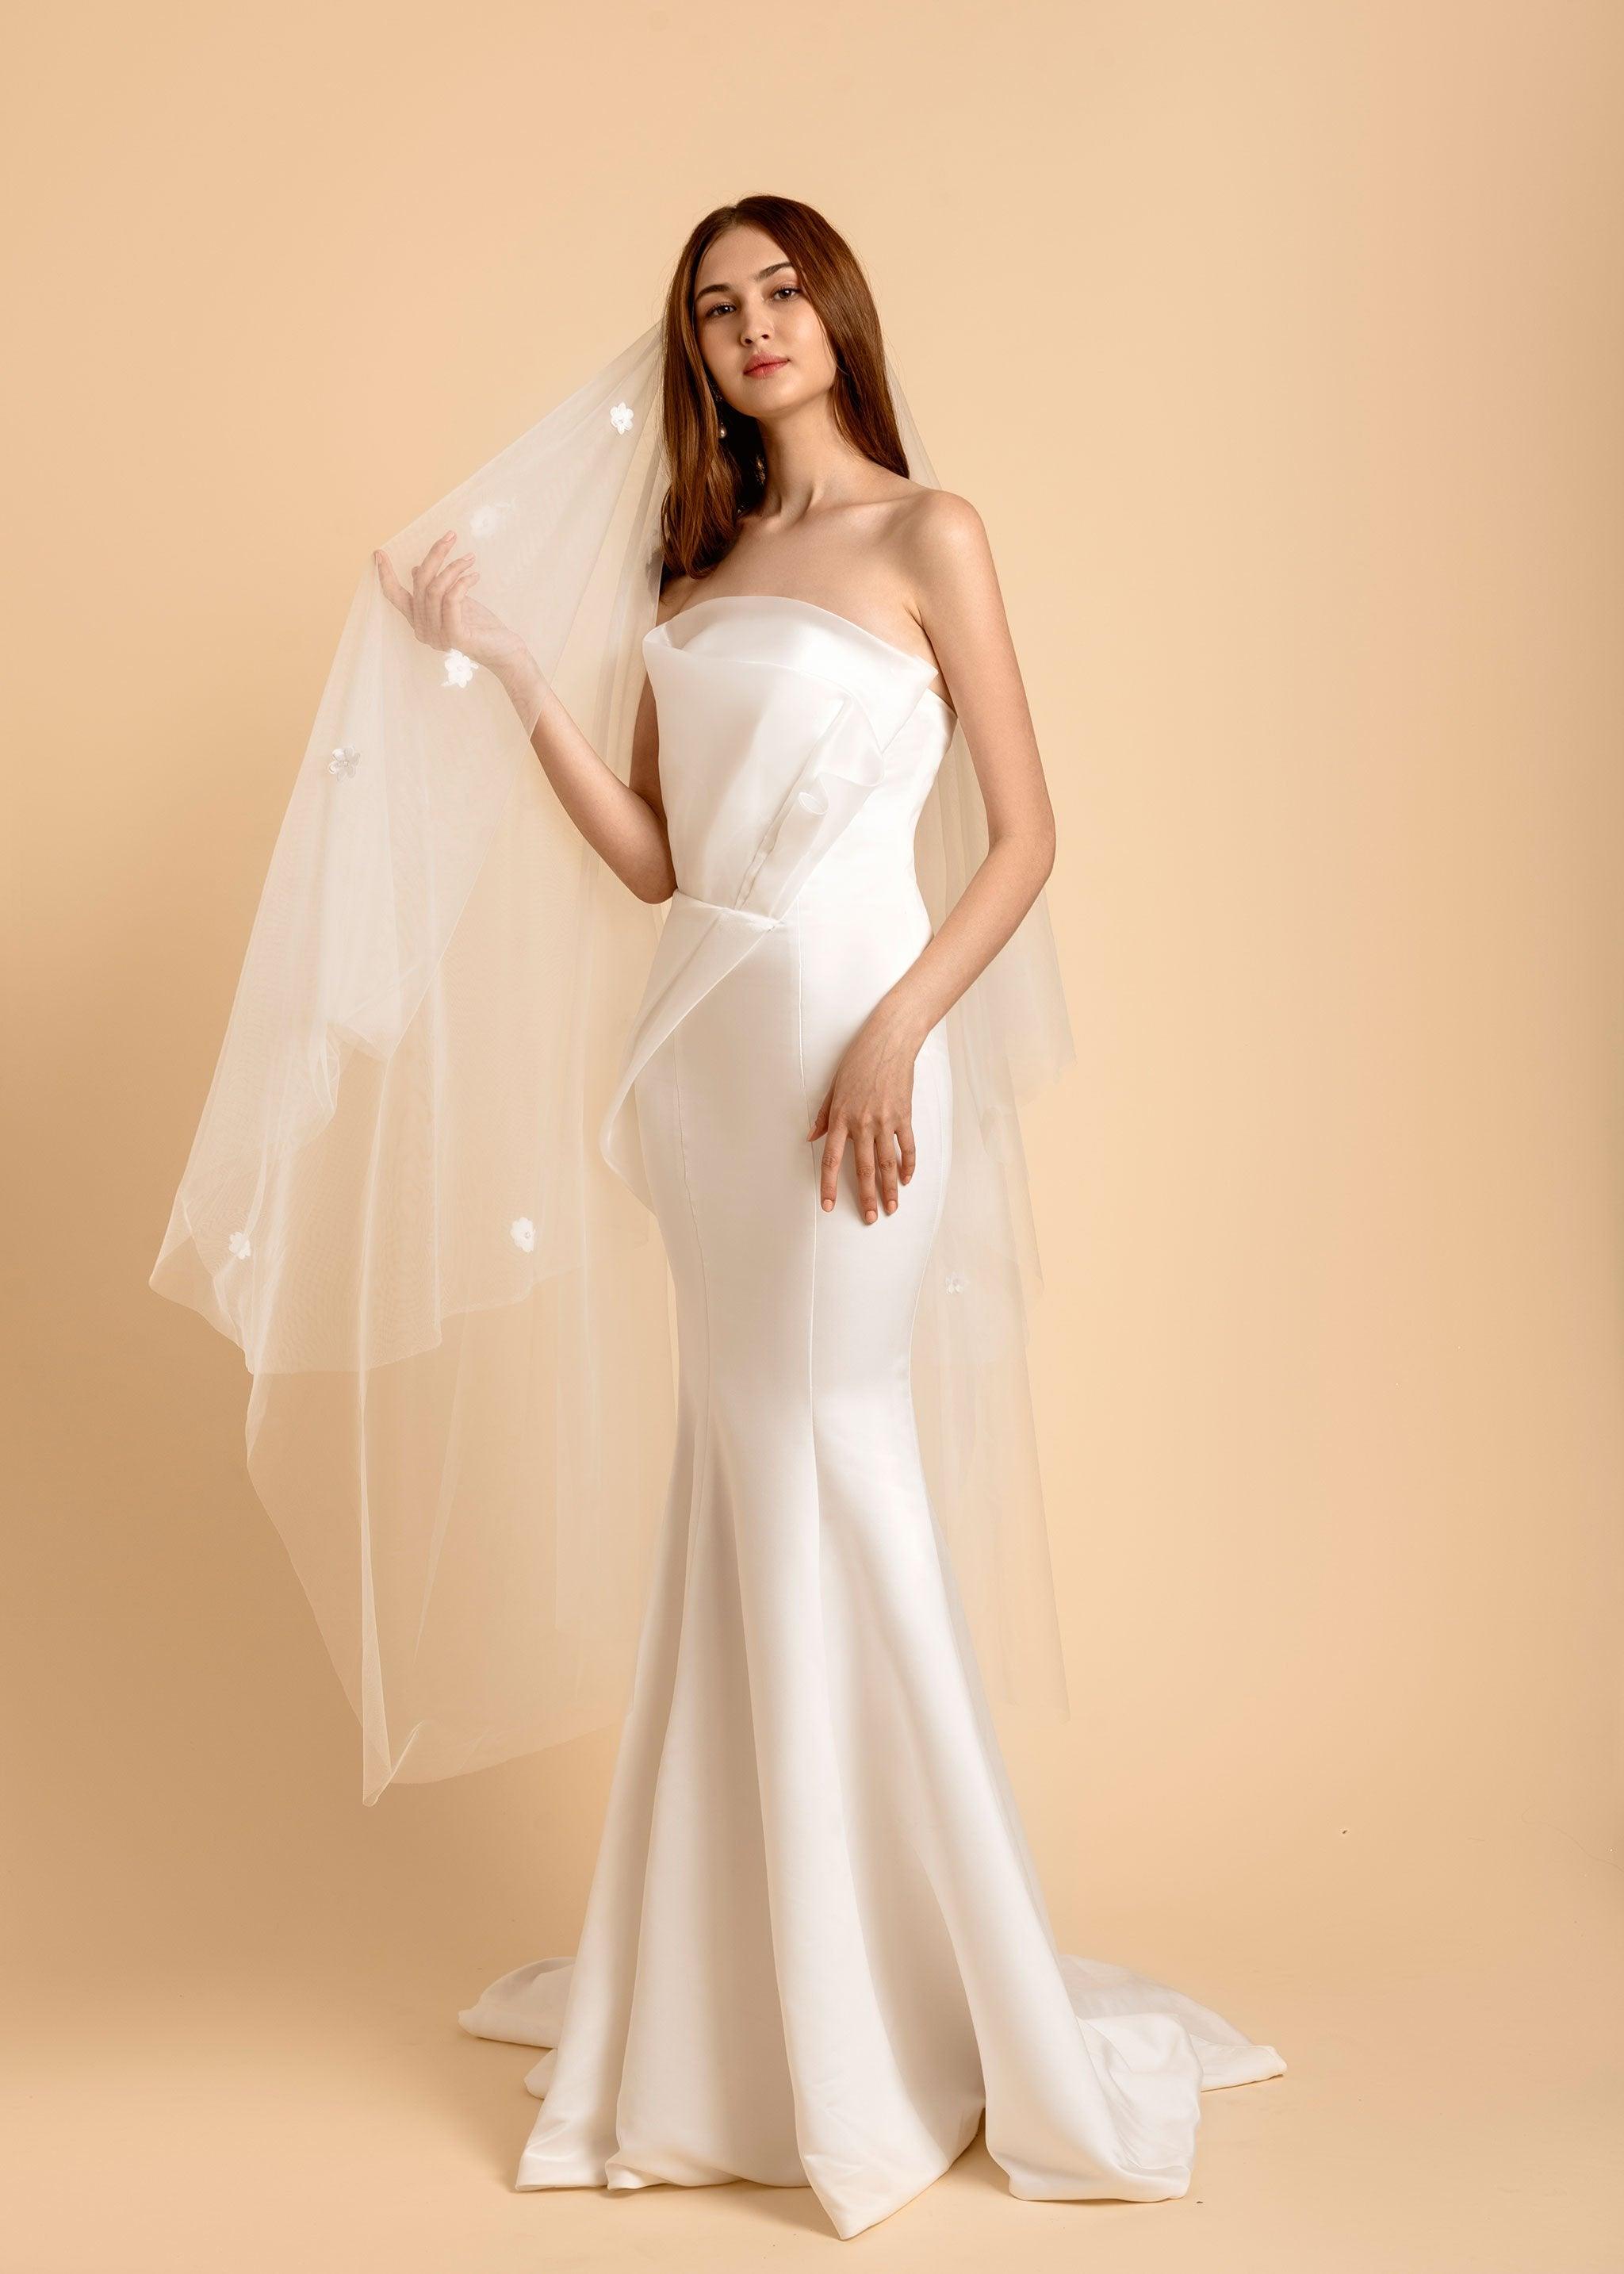 Strapless Wedding Gown | Trumpet Silhouette Dress | Dare and Dazzle